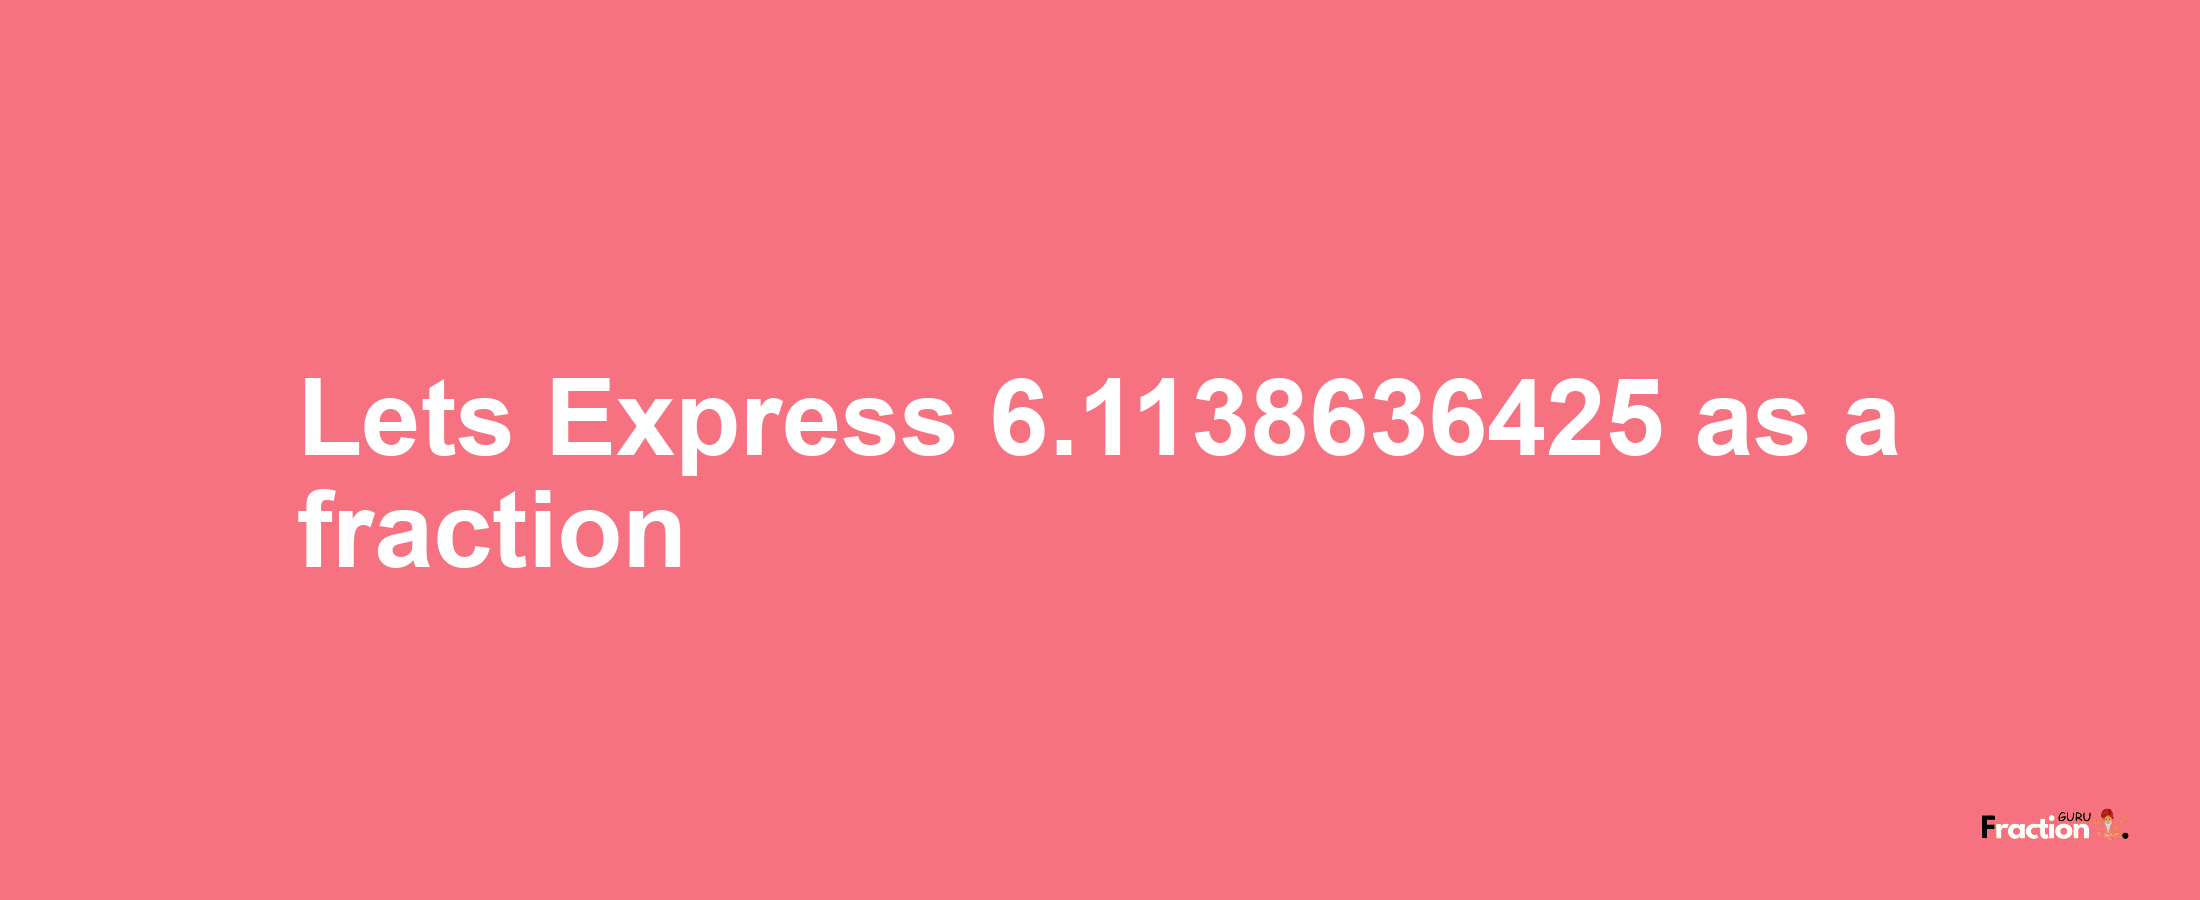 Lets Express 6.1138636425 as afraction